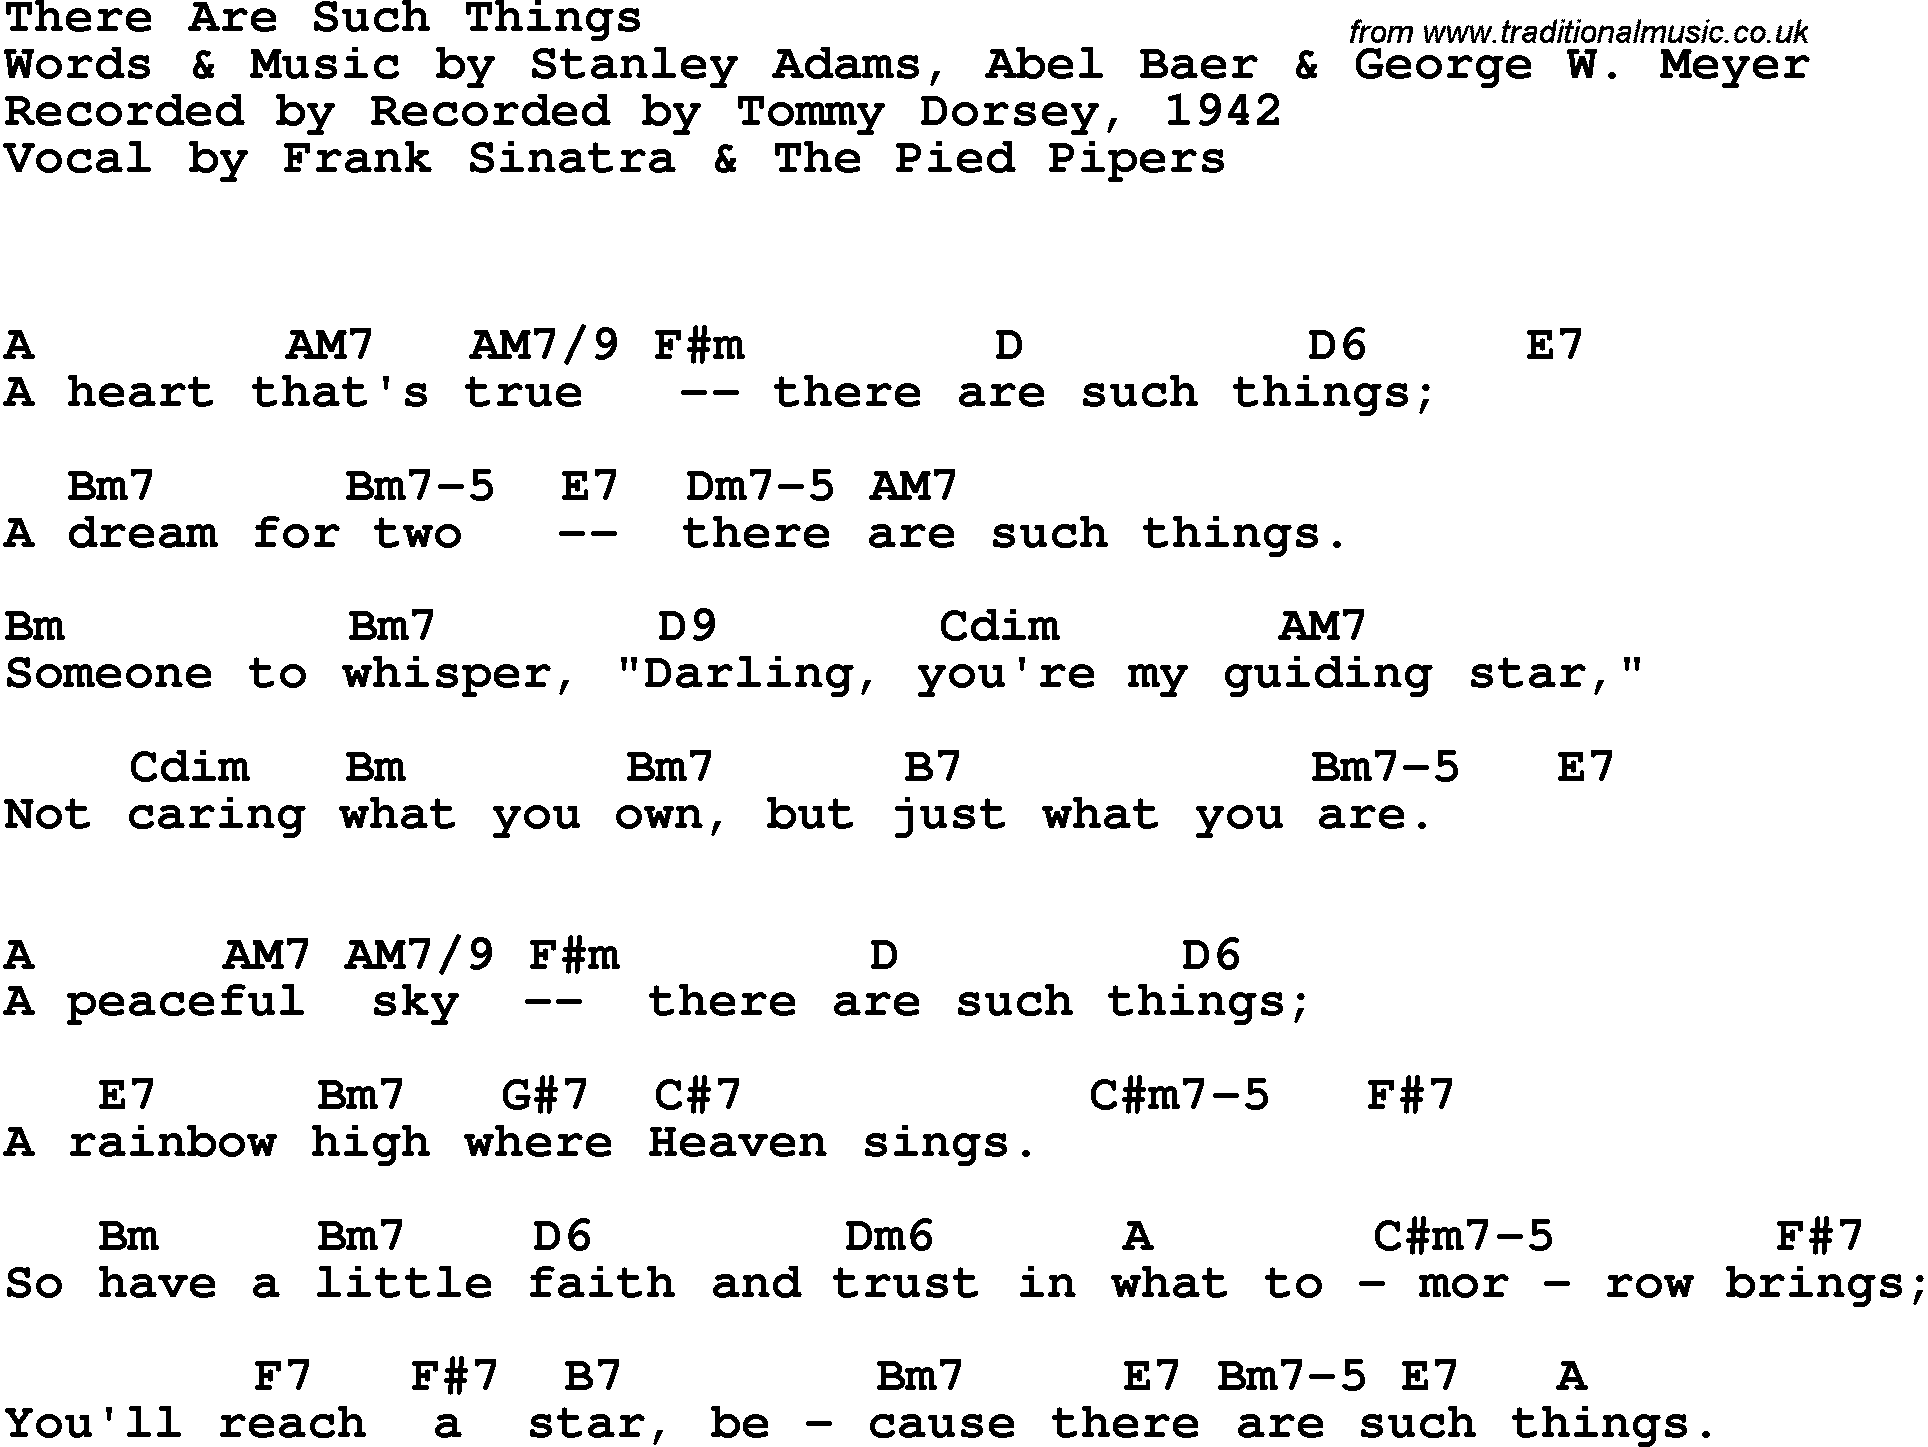 Song Lyrics with guitar chords for There Are Such Things - Tommy Dorsey, Frank Sinatra & The Pied Pipers, 1942